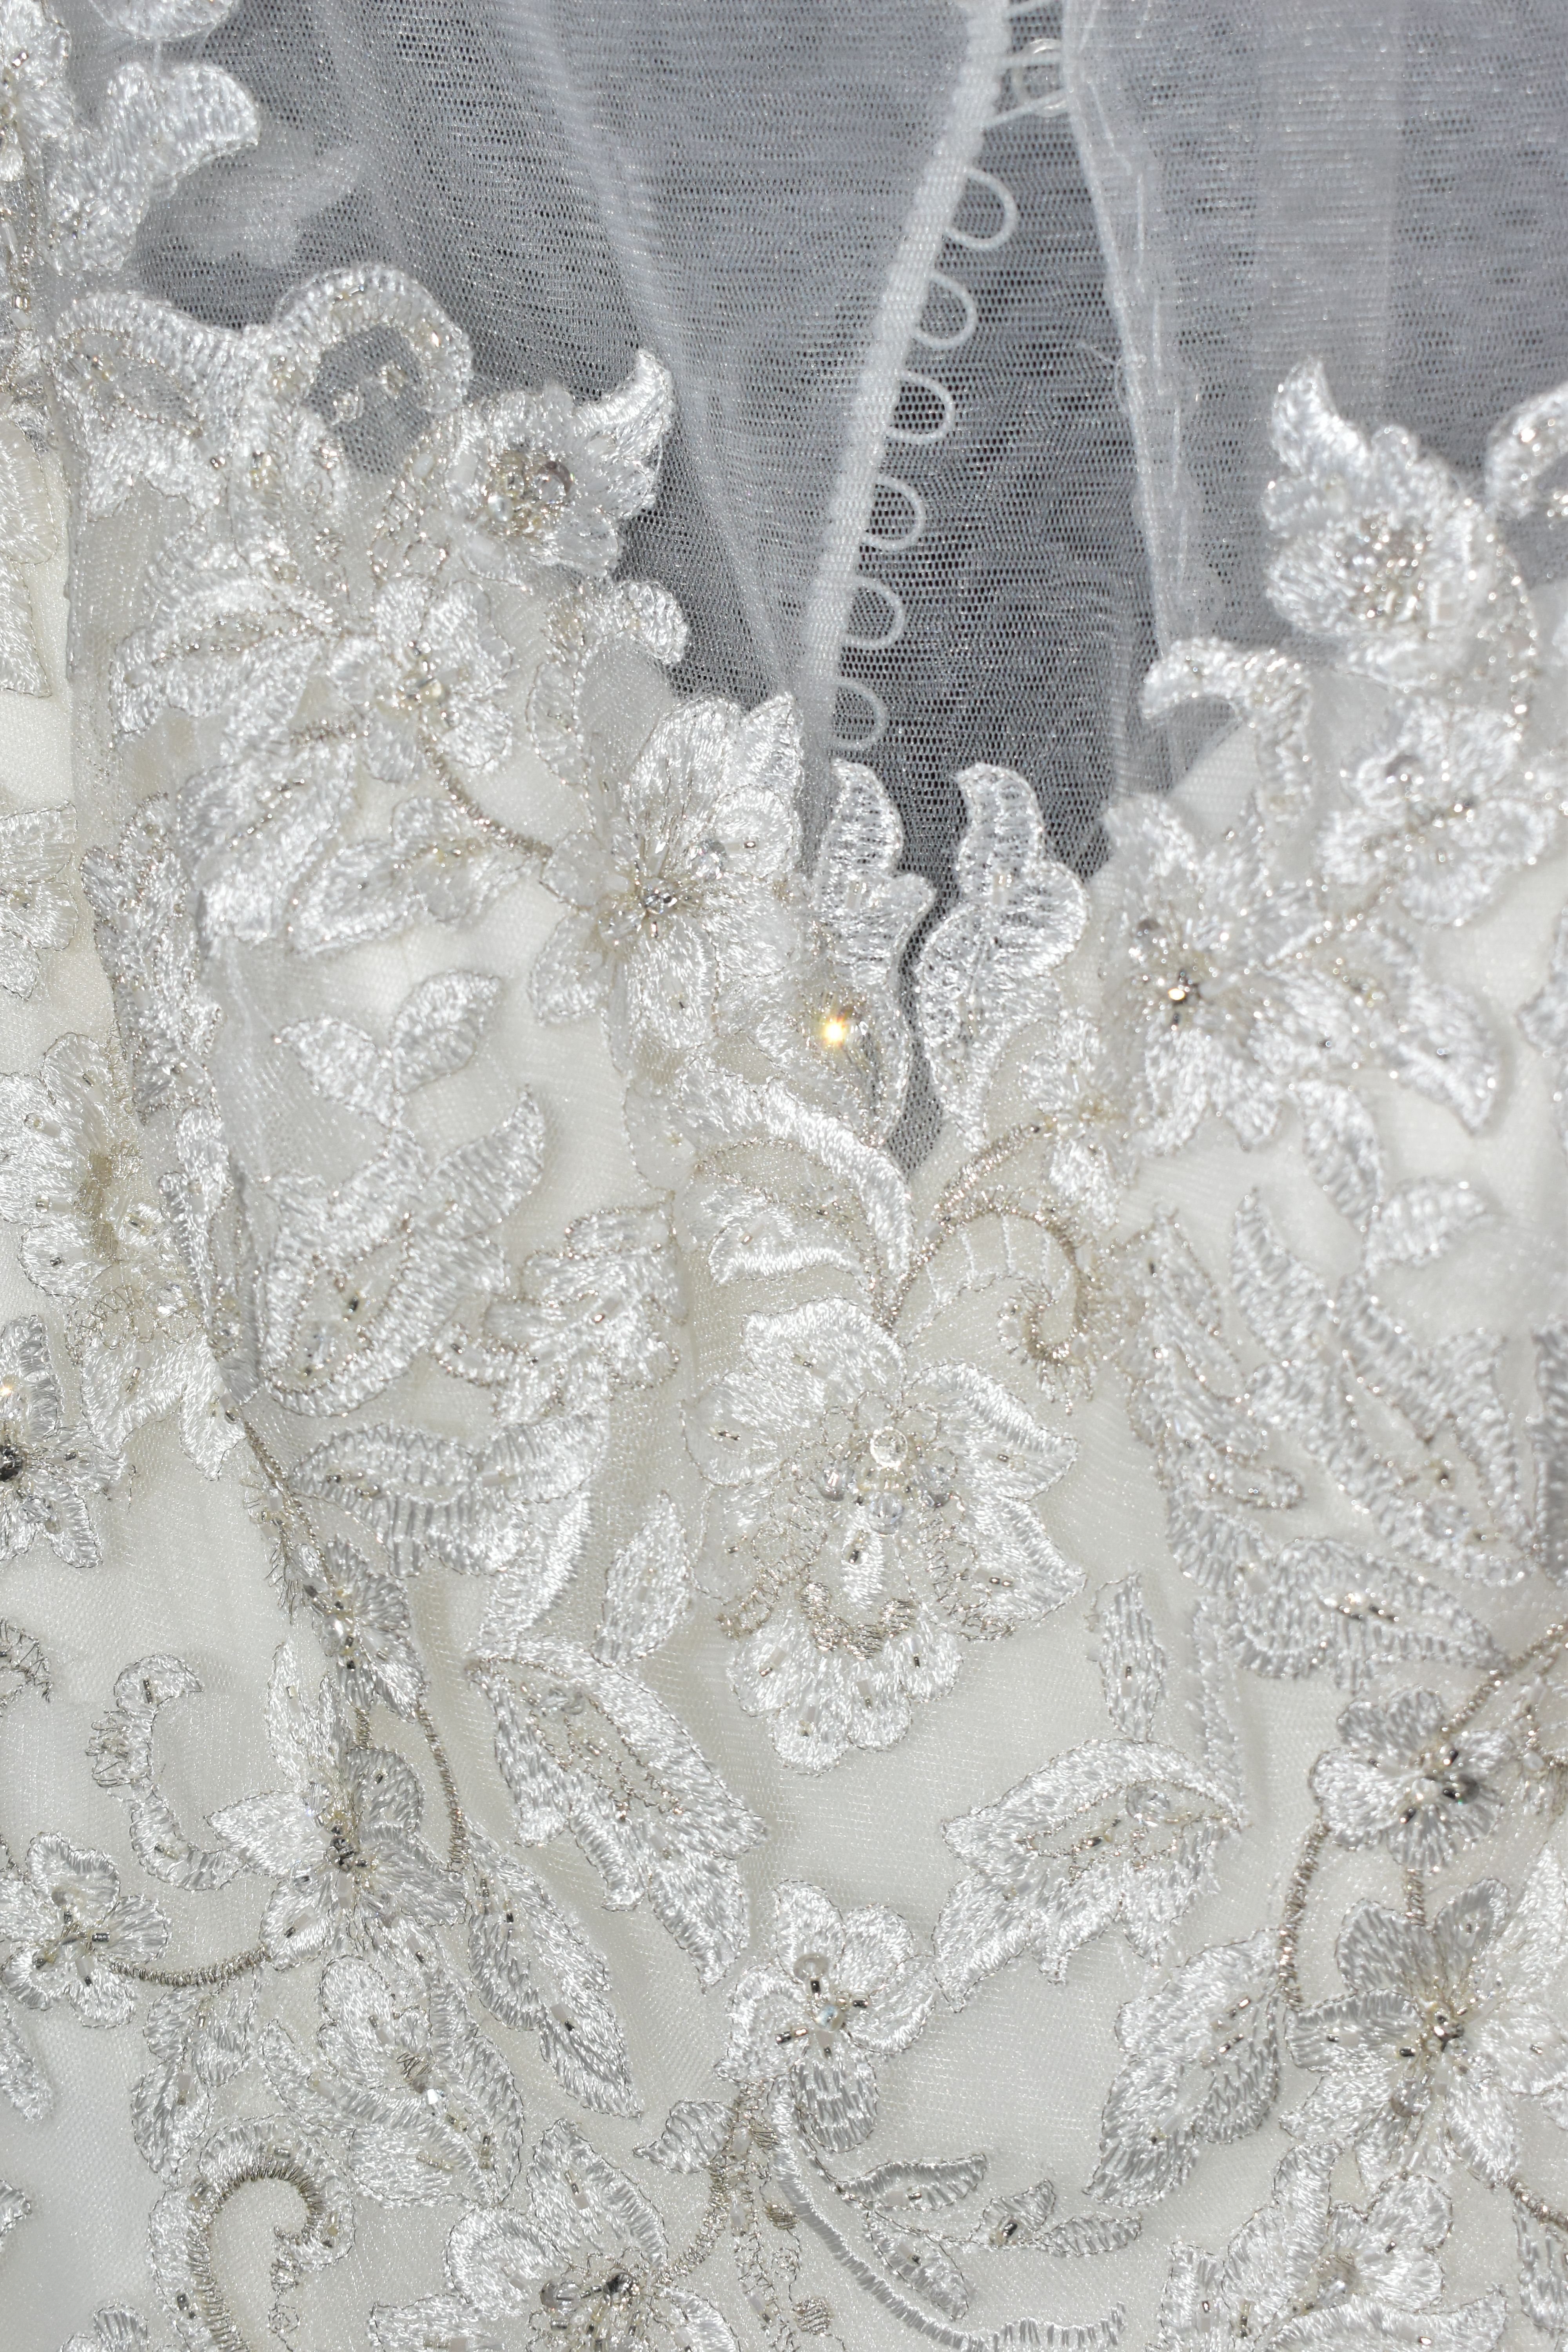 WEDDING DRESS, 'Sophia Tolli', ivory, size 6, beaded appliques, button detail along back, dropped - Image 4 of 16